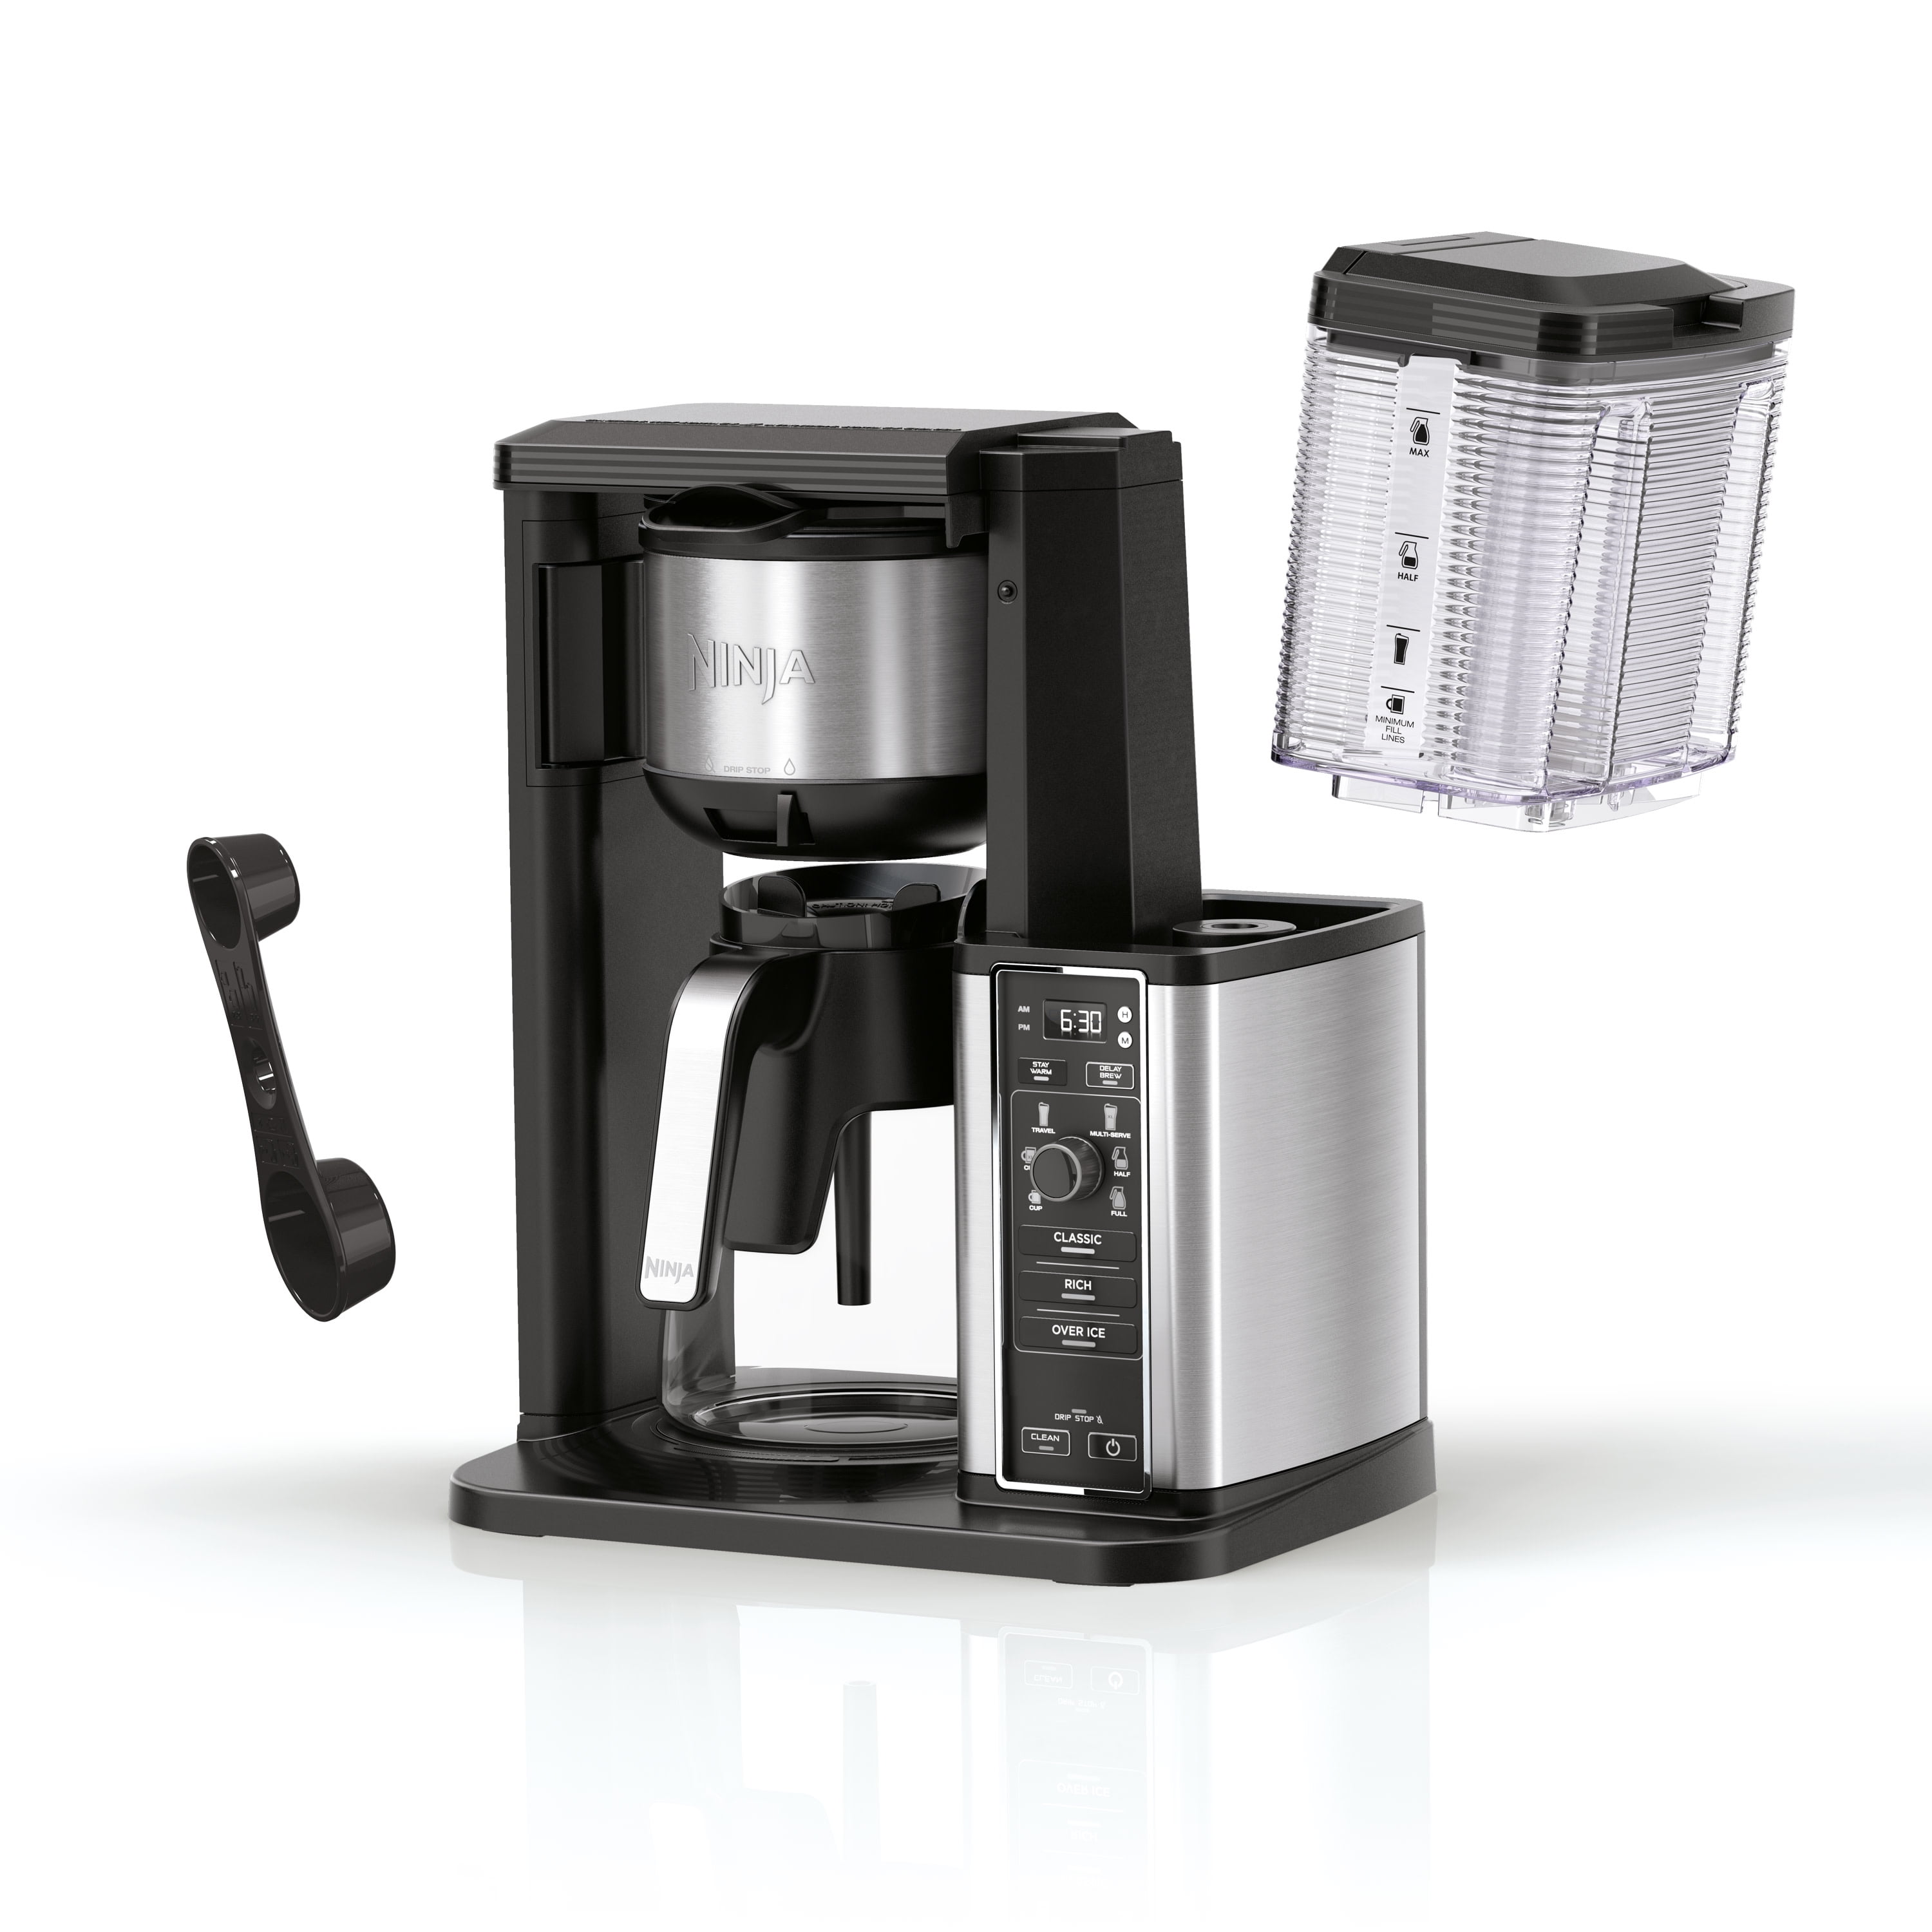 Restored Ninja Coffee Maker for Hot/Iced Coffee with 4 Brew Sizes